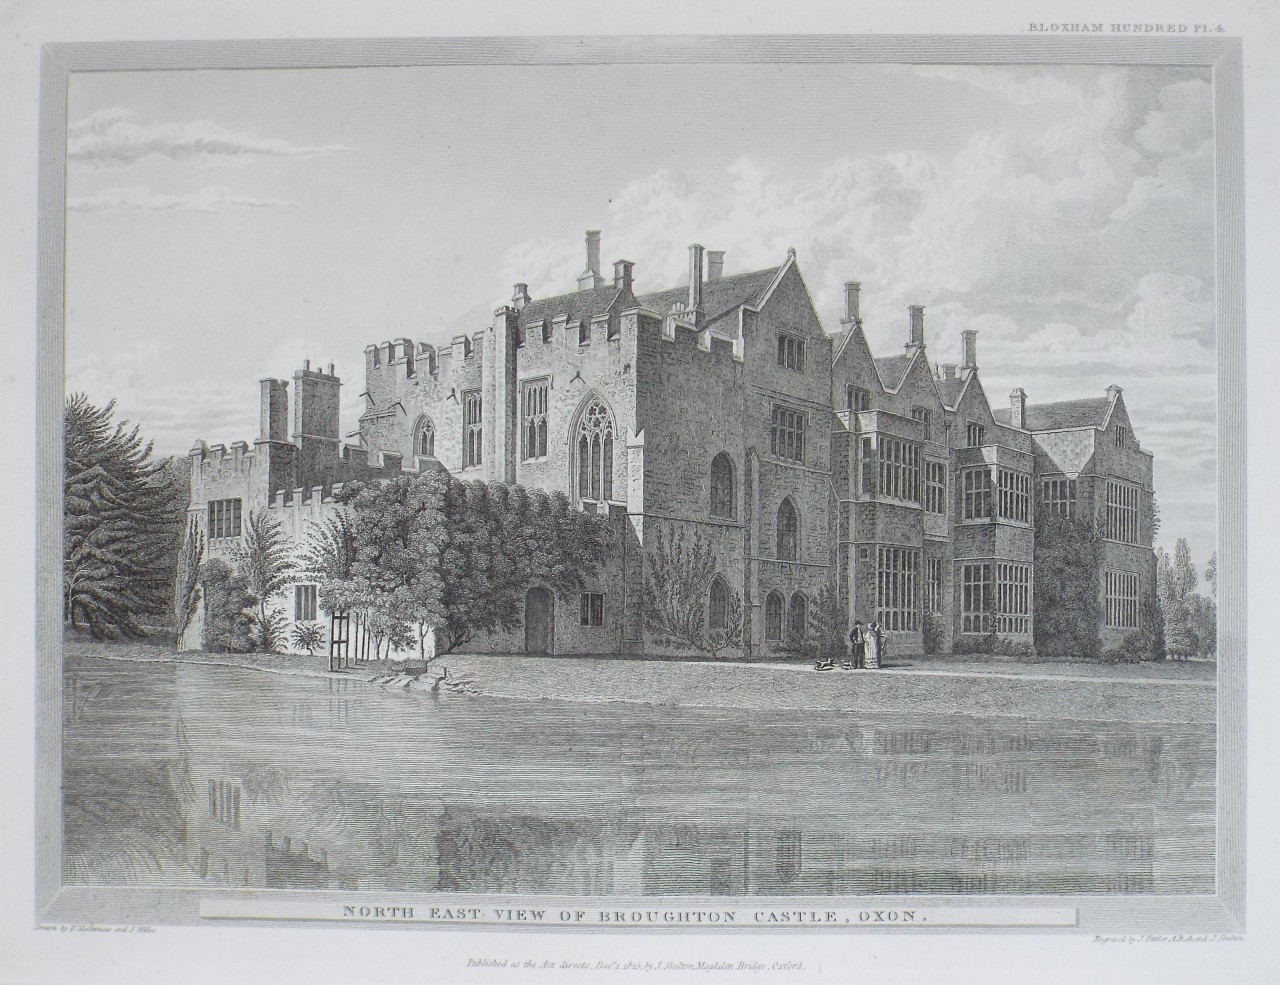 Print - North East View of Broughton Castle, Oxon. - Skelton